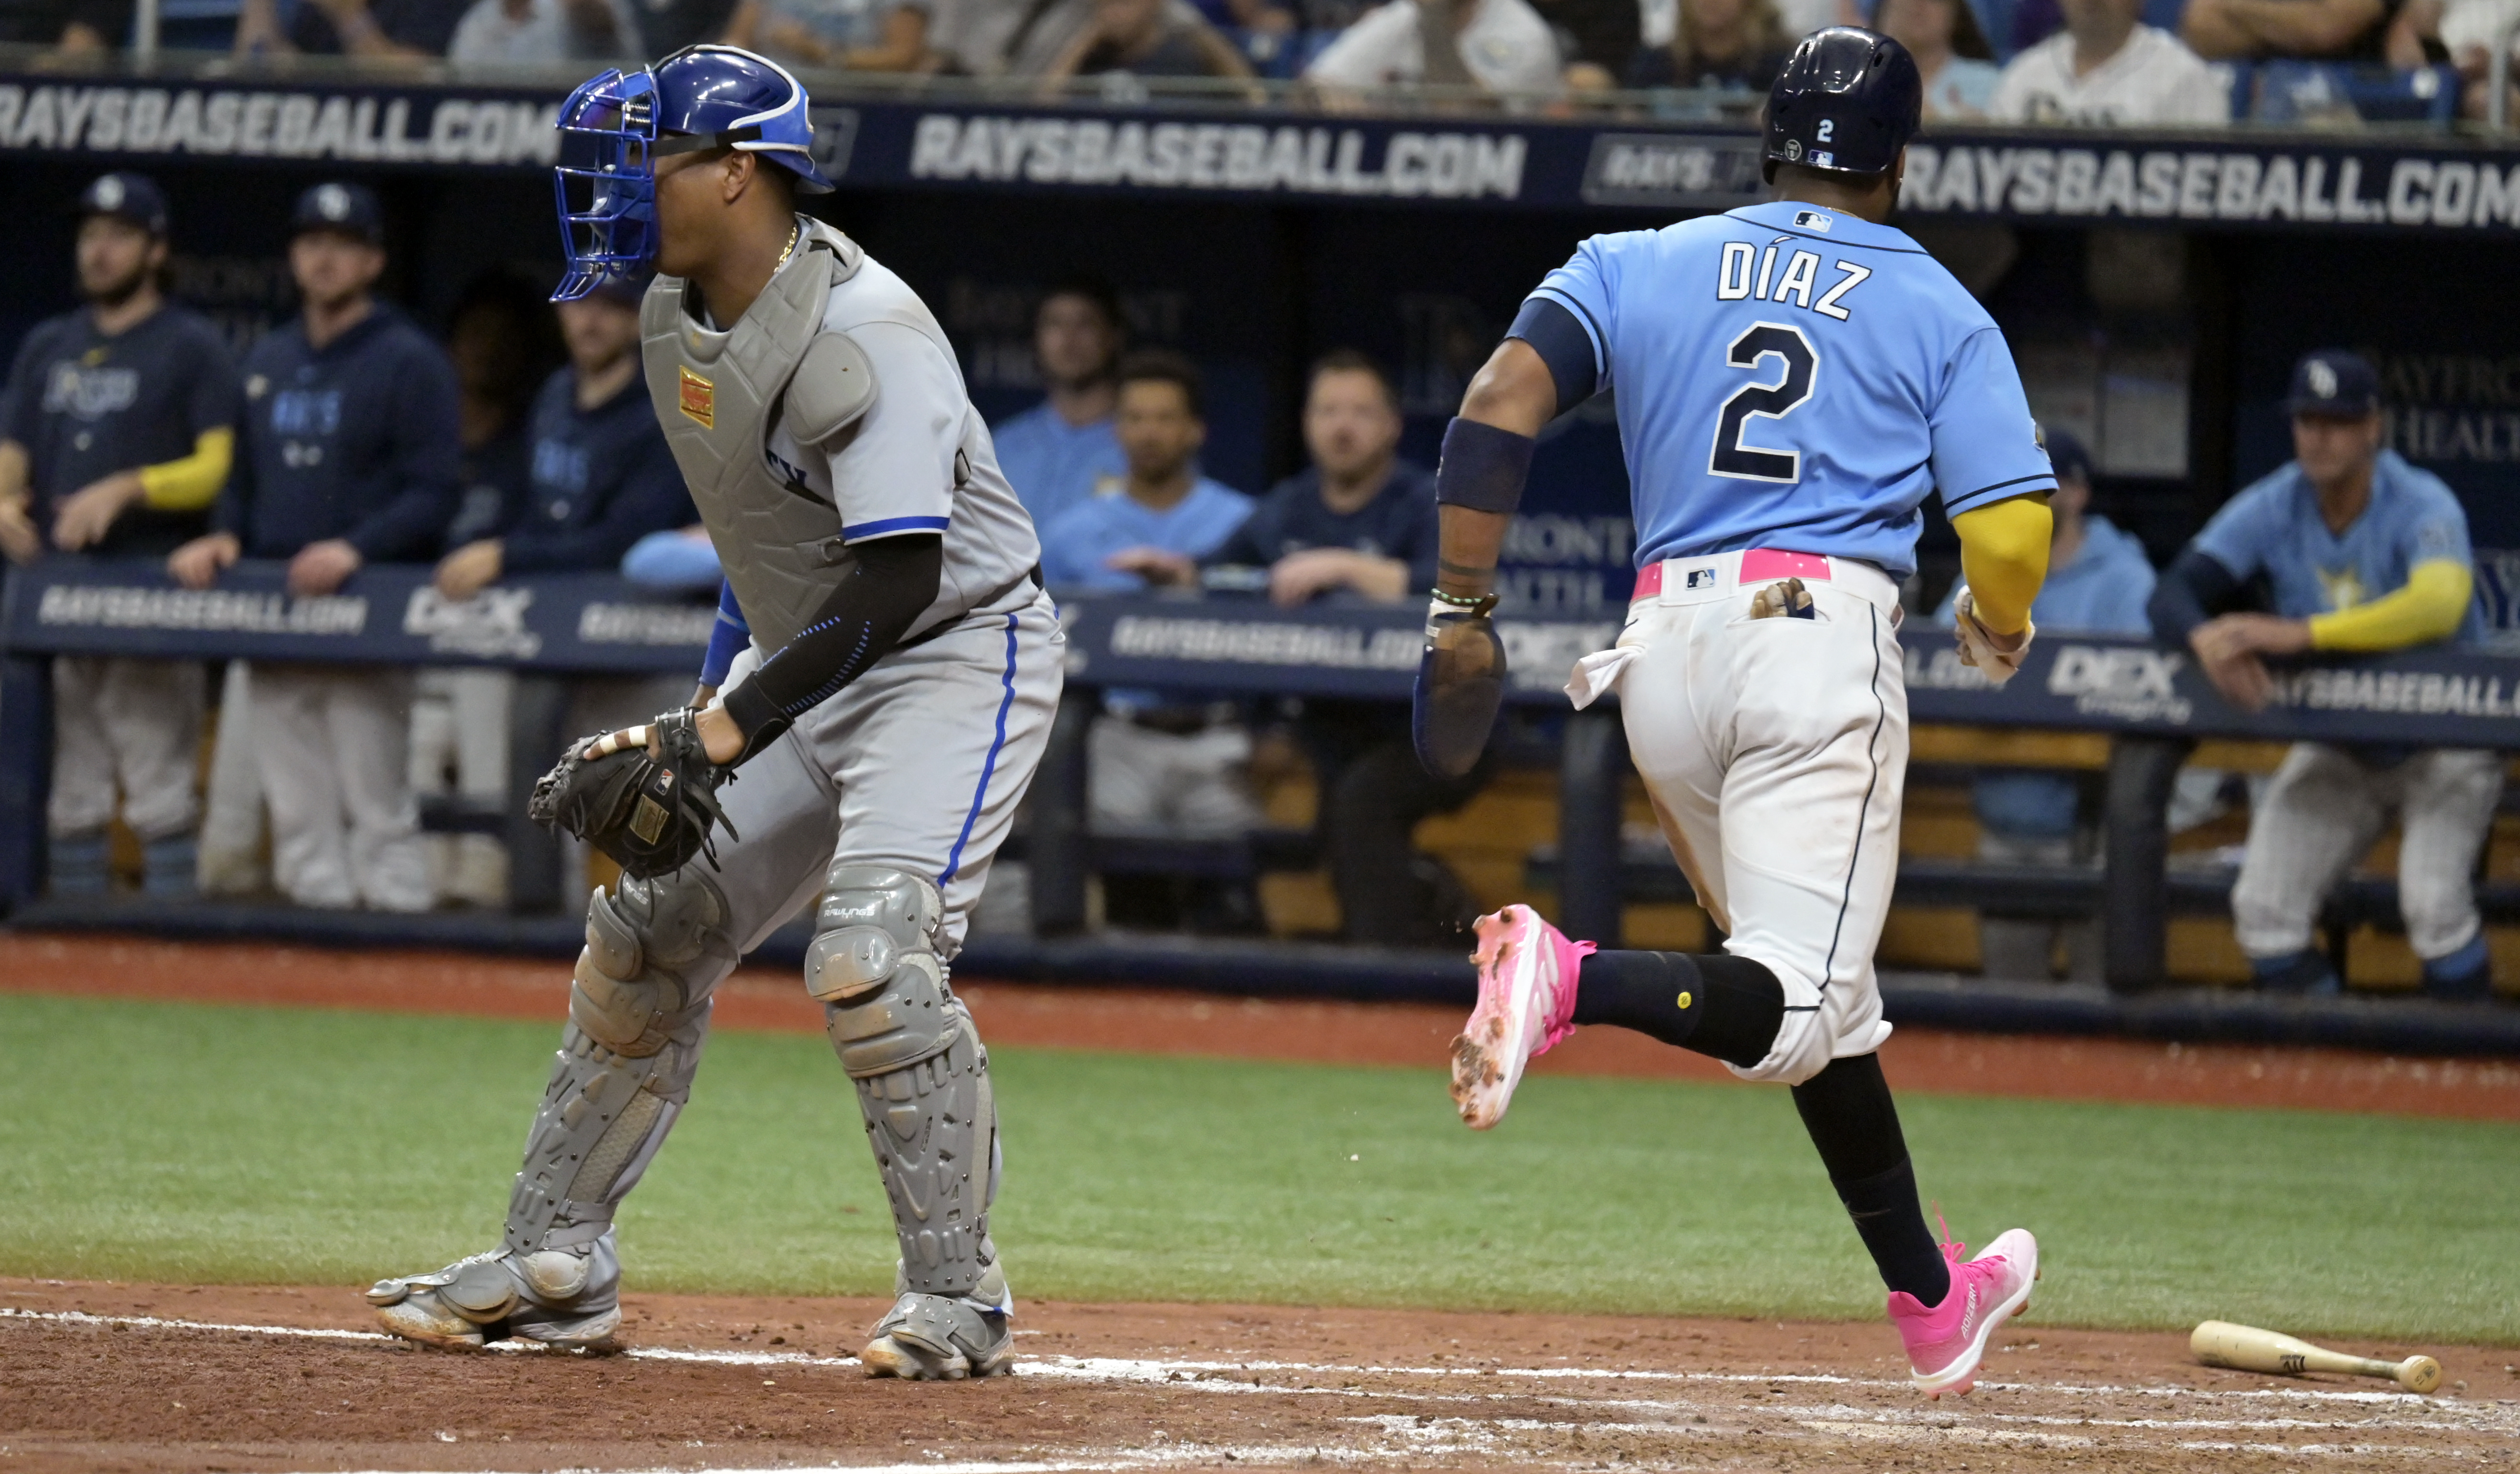 Yandy Diaz sparking Rays' offense but struggling with power at plate